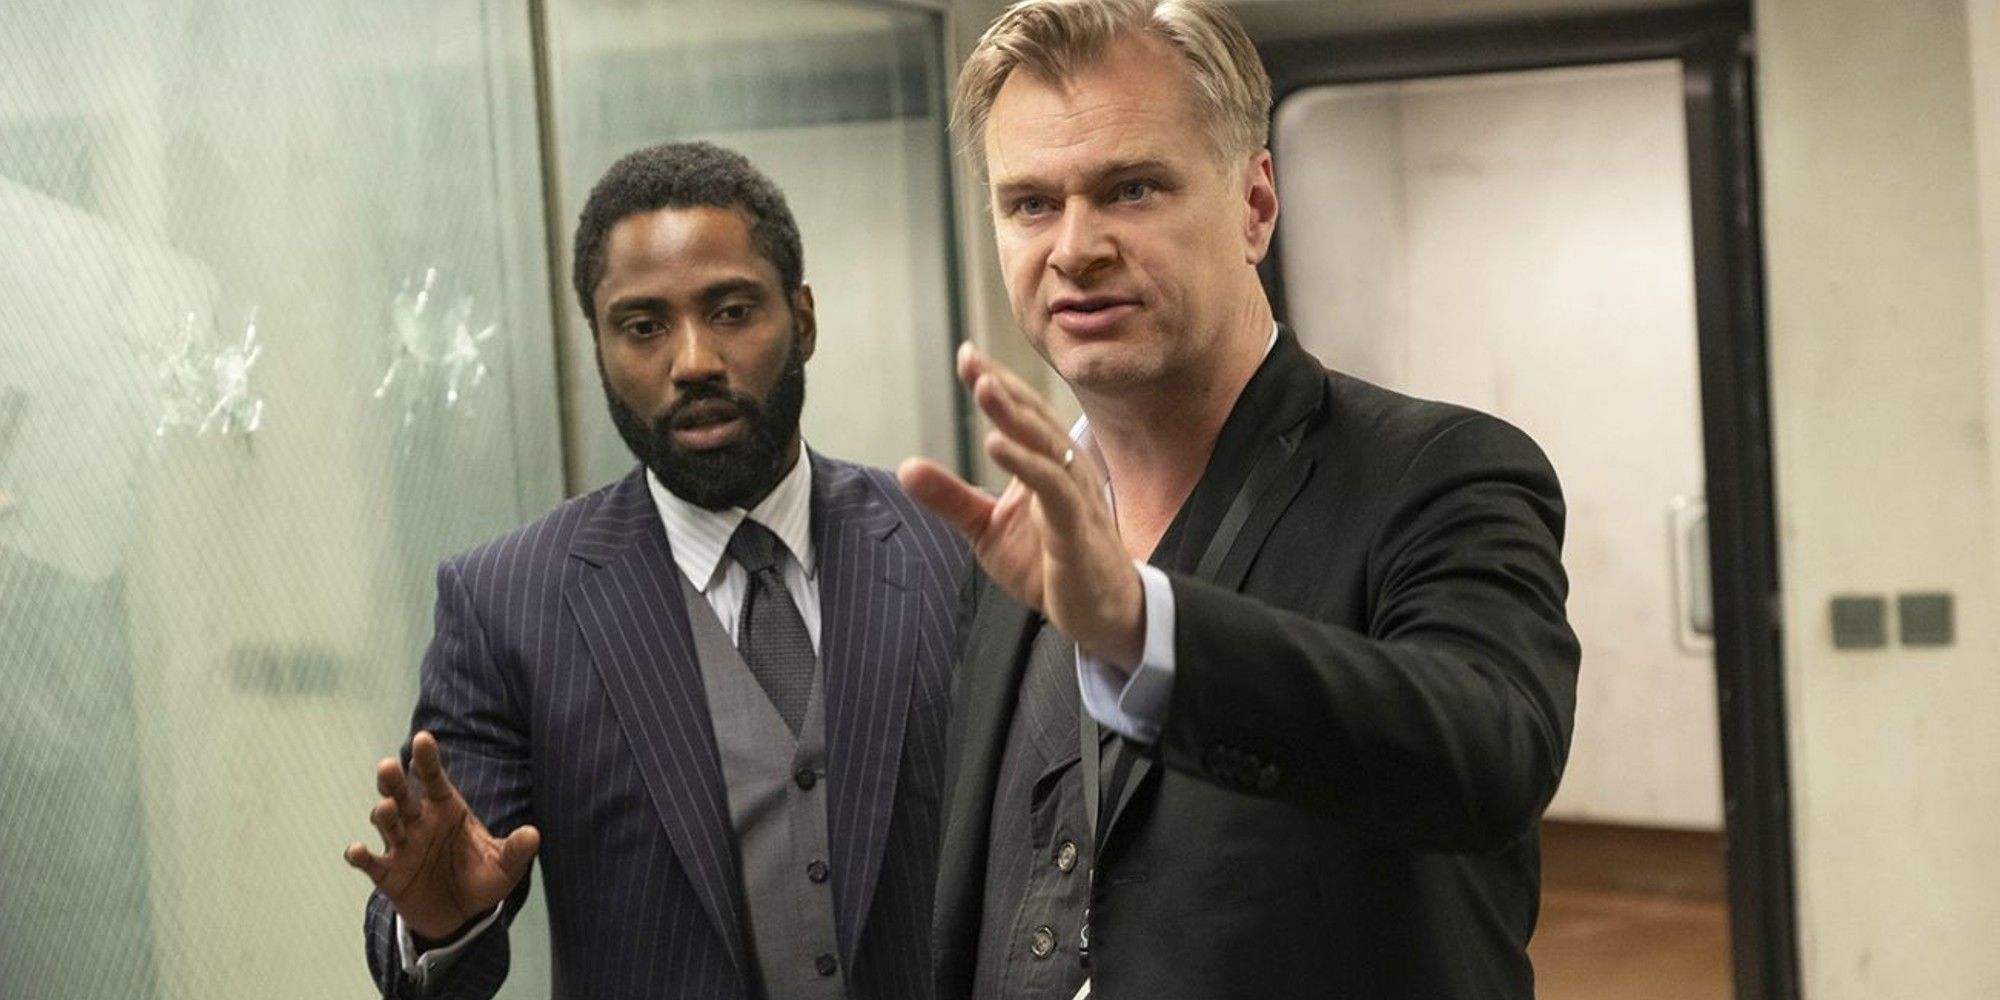 Christopher Nolan’s Move to Universal Was Encouraged By M. Night Shyamalan